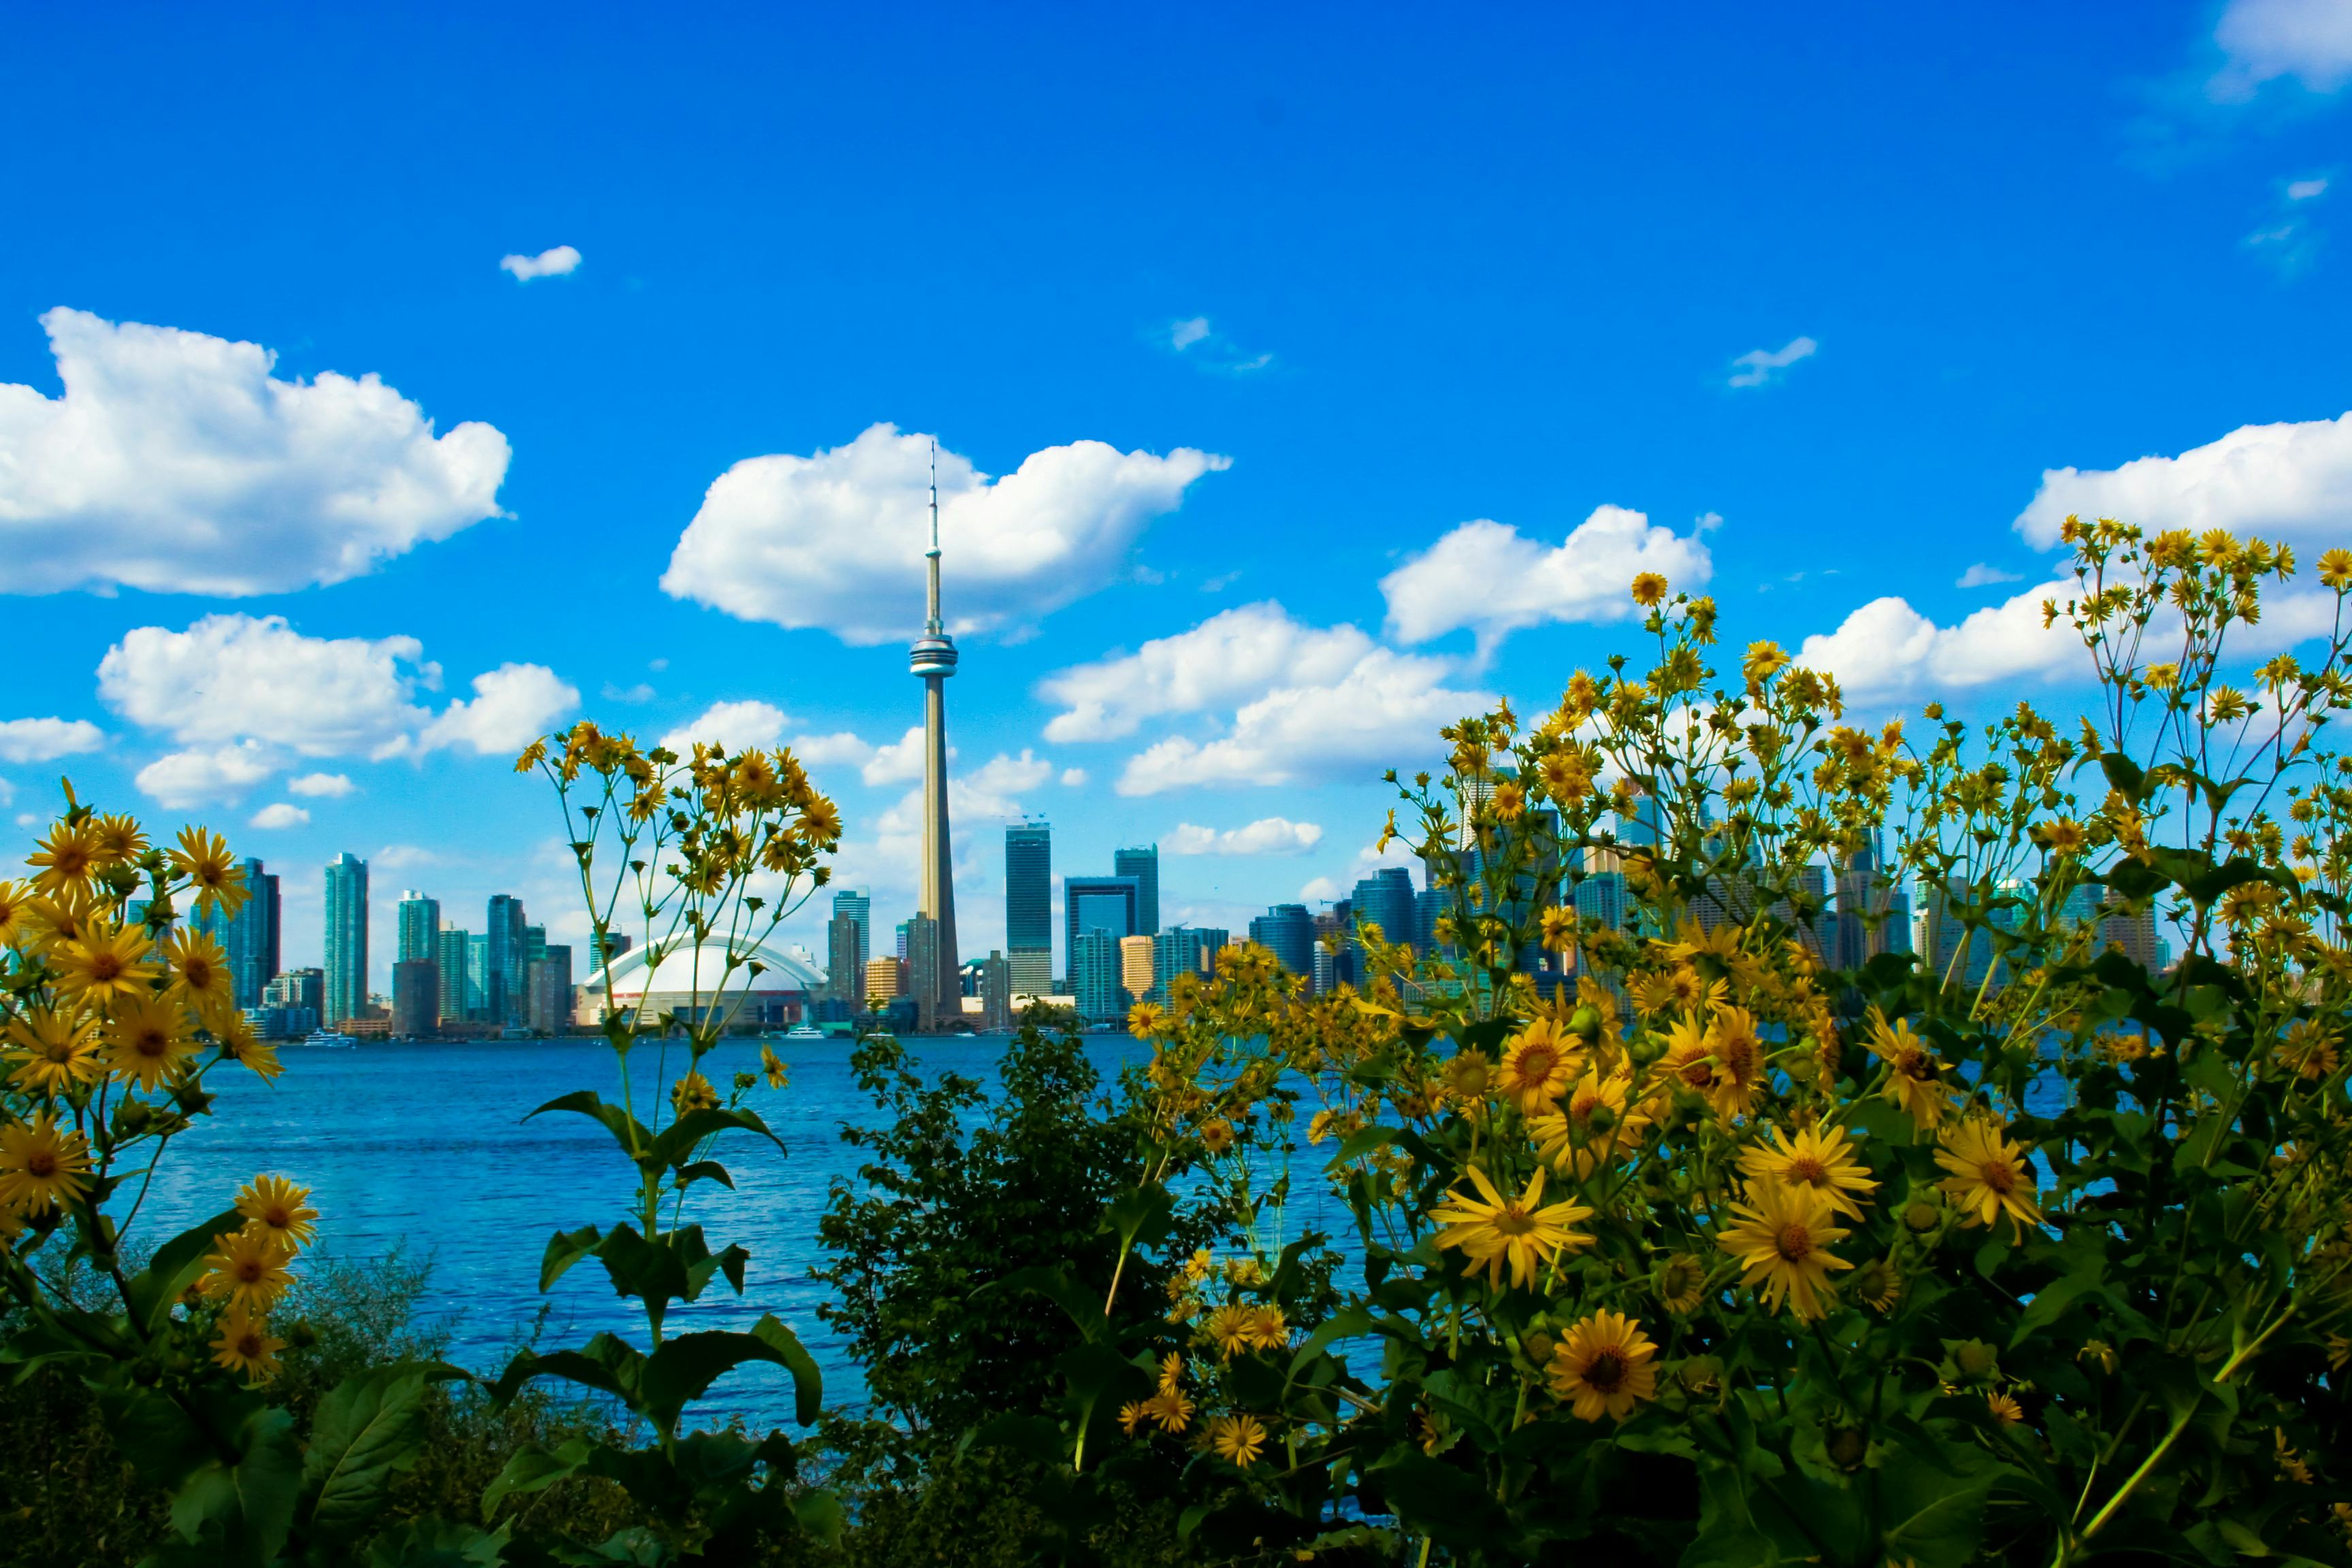 The Toronto skyline from across the river on a beautiful day with yellow flowers in the foreground.